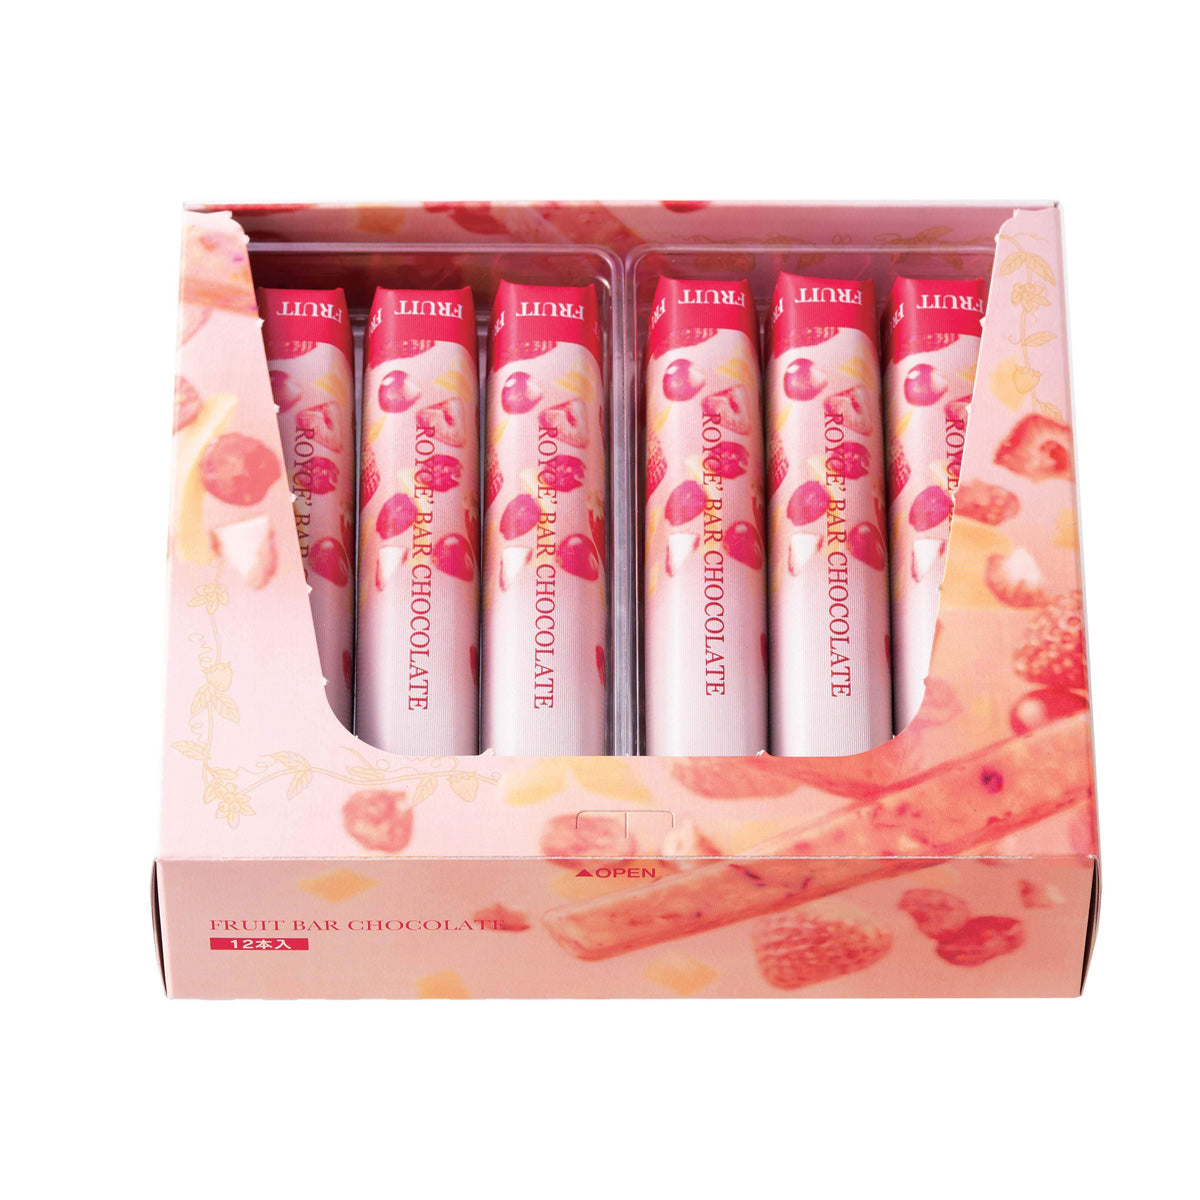 ROYCE' Chocolate - Fruit Bar Chocolate - Image shows a pink open box with wrapped bars inside. Text on each wrapped bar says ROYCE' Bar Chocolate.